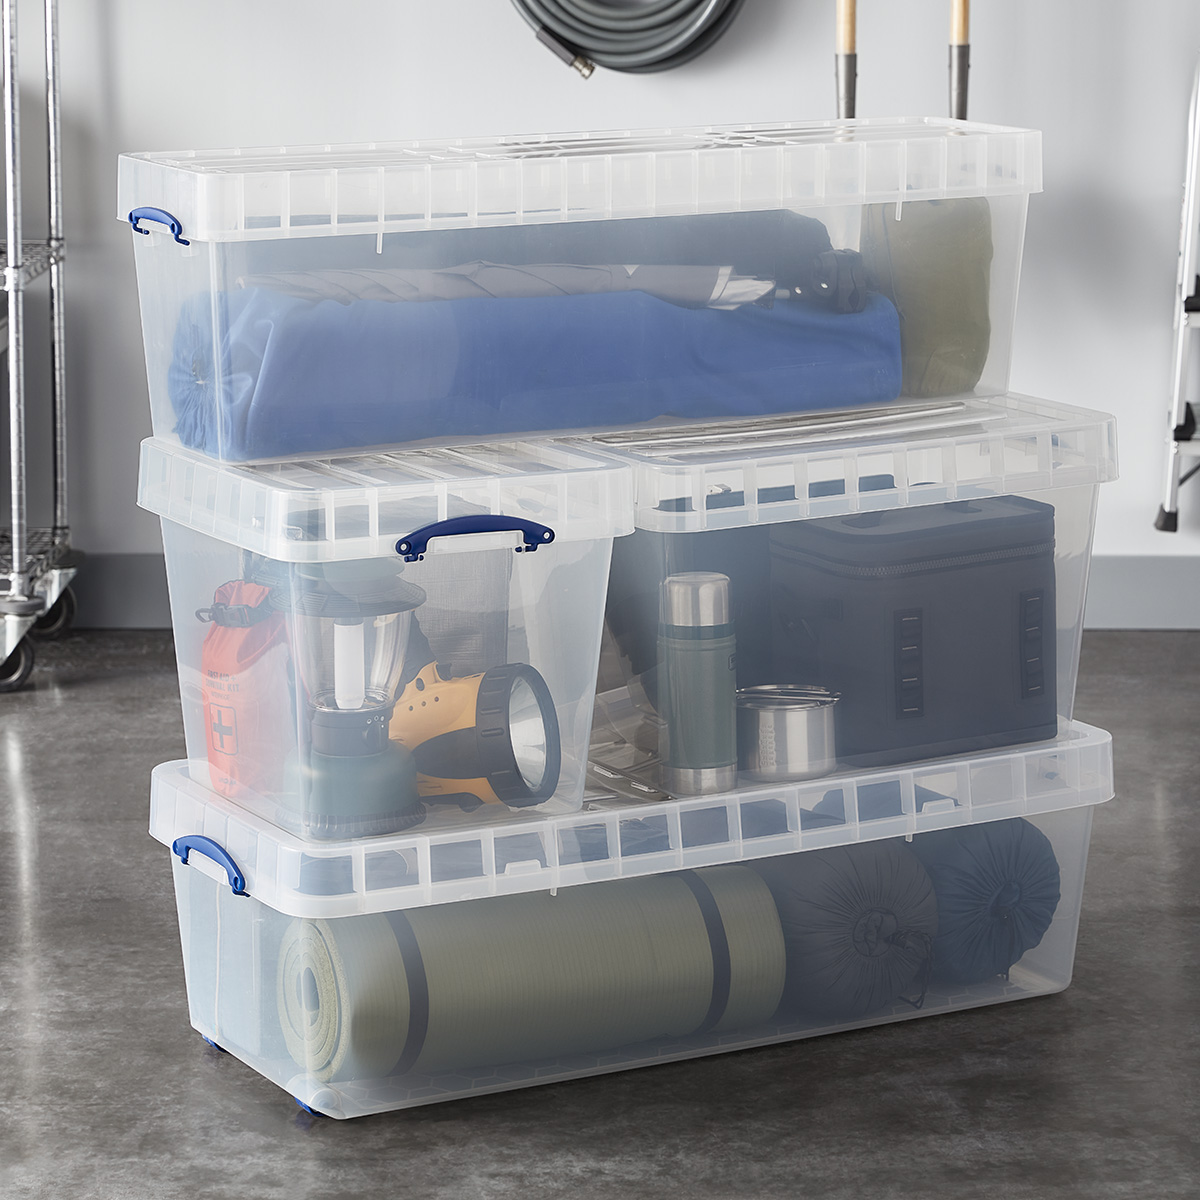 https://www.containerstore.com/catalogimages/439373/10081542g_XL_Premier_modular_Tote_cl.jpg